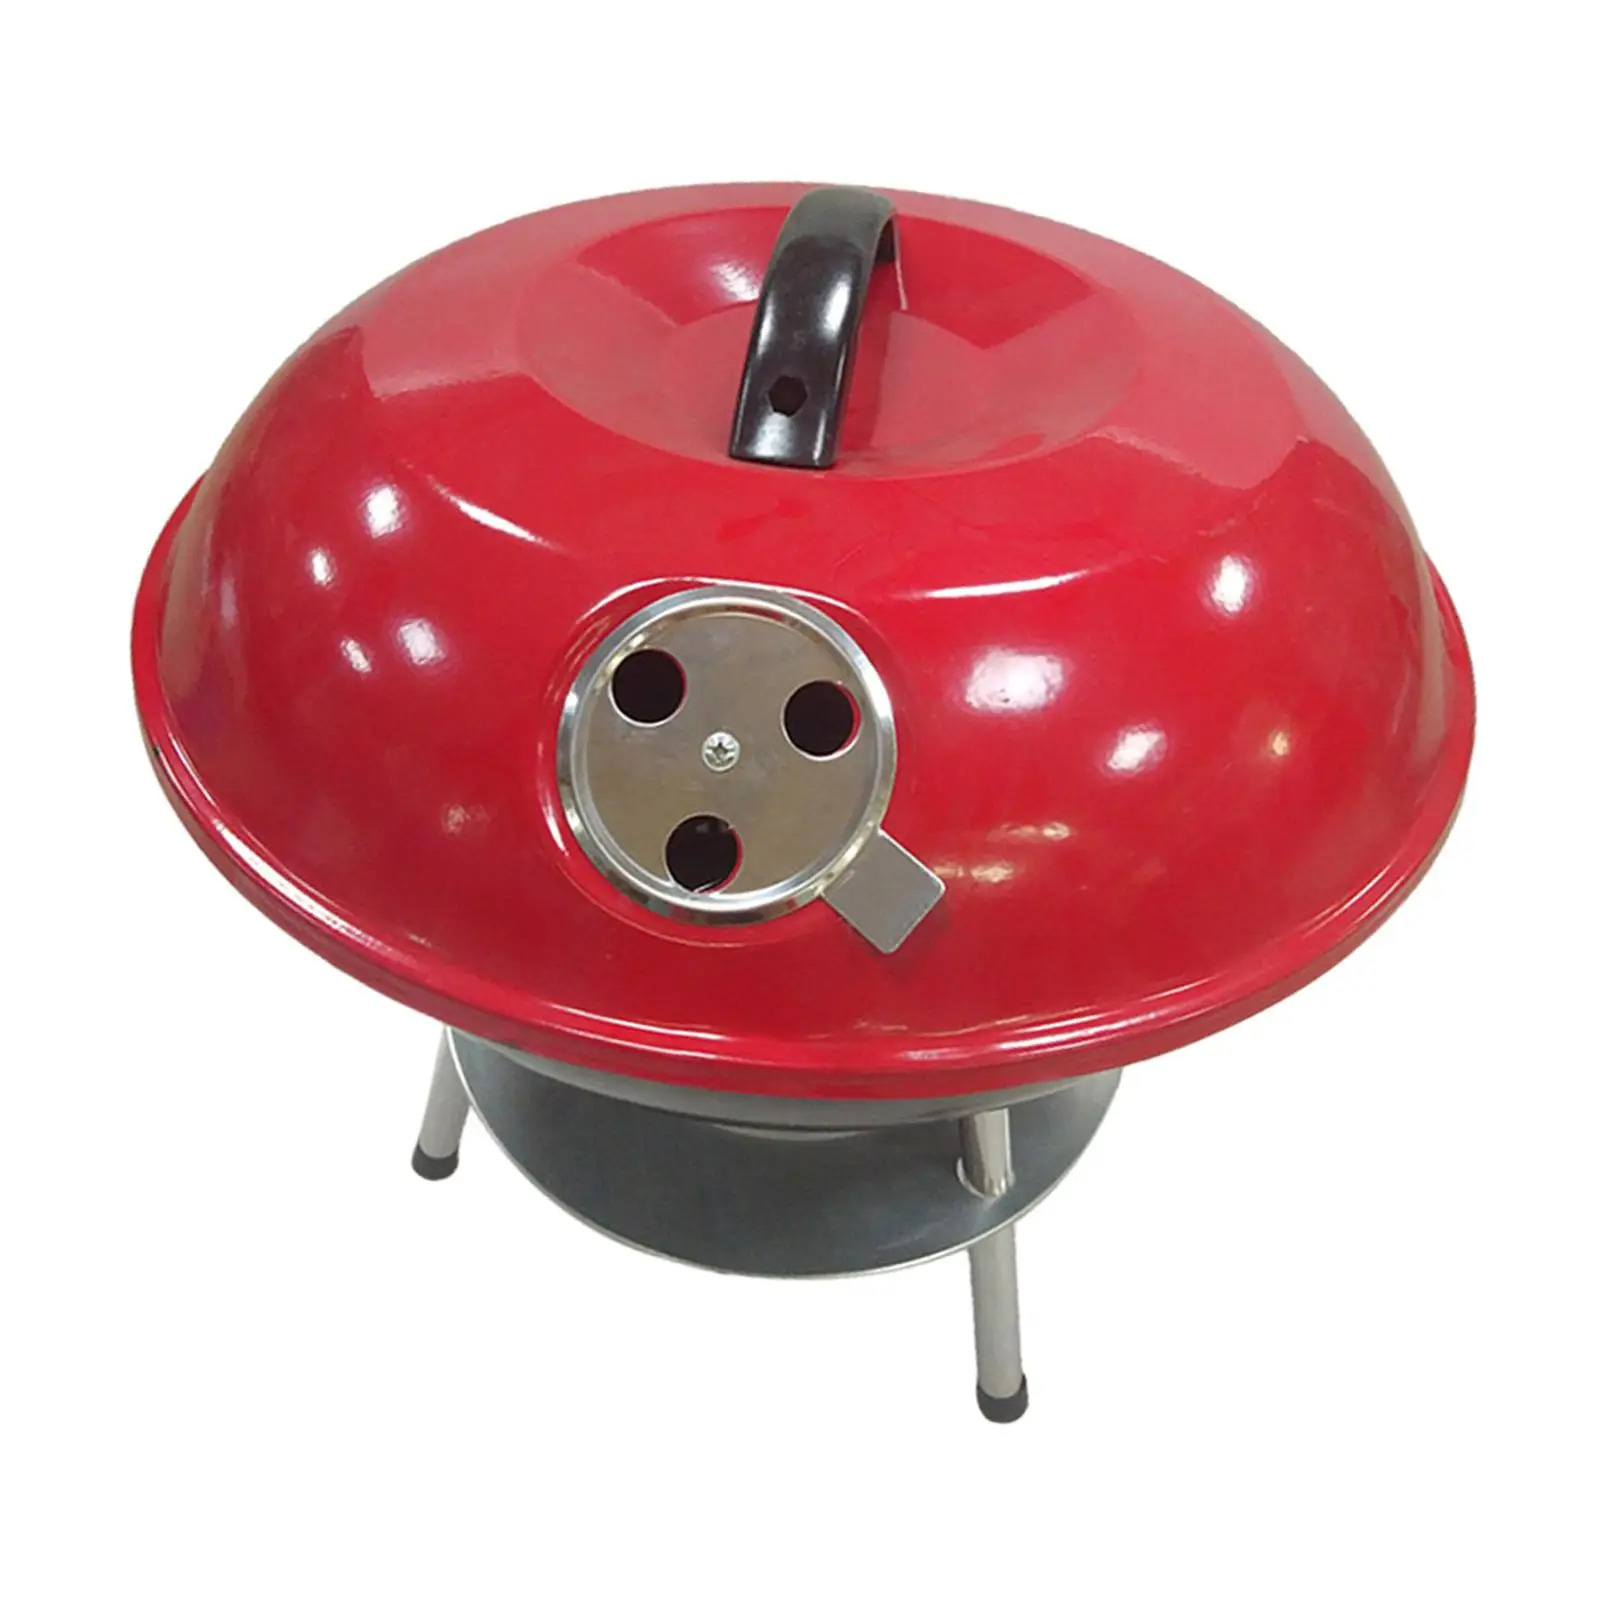 BBQ Grill Apple Shape Charcoal Stove for Backyard Camping Outdoor Grilling